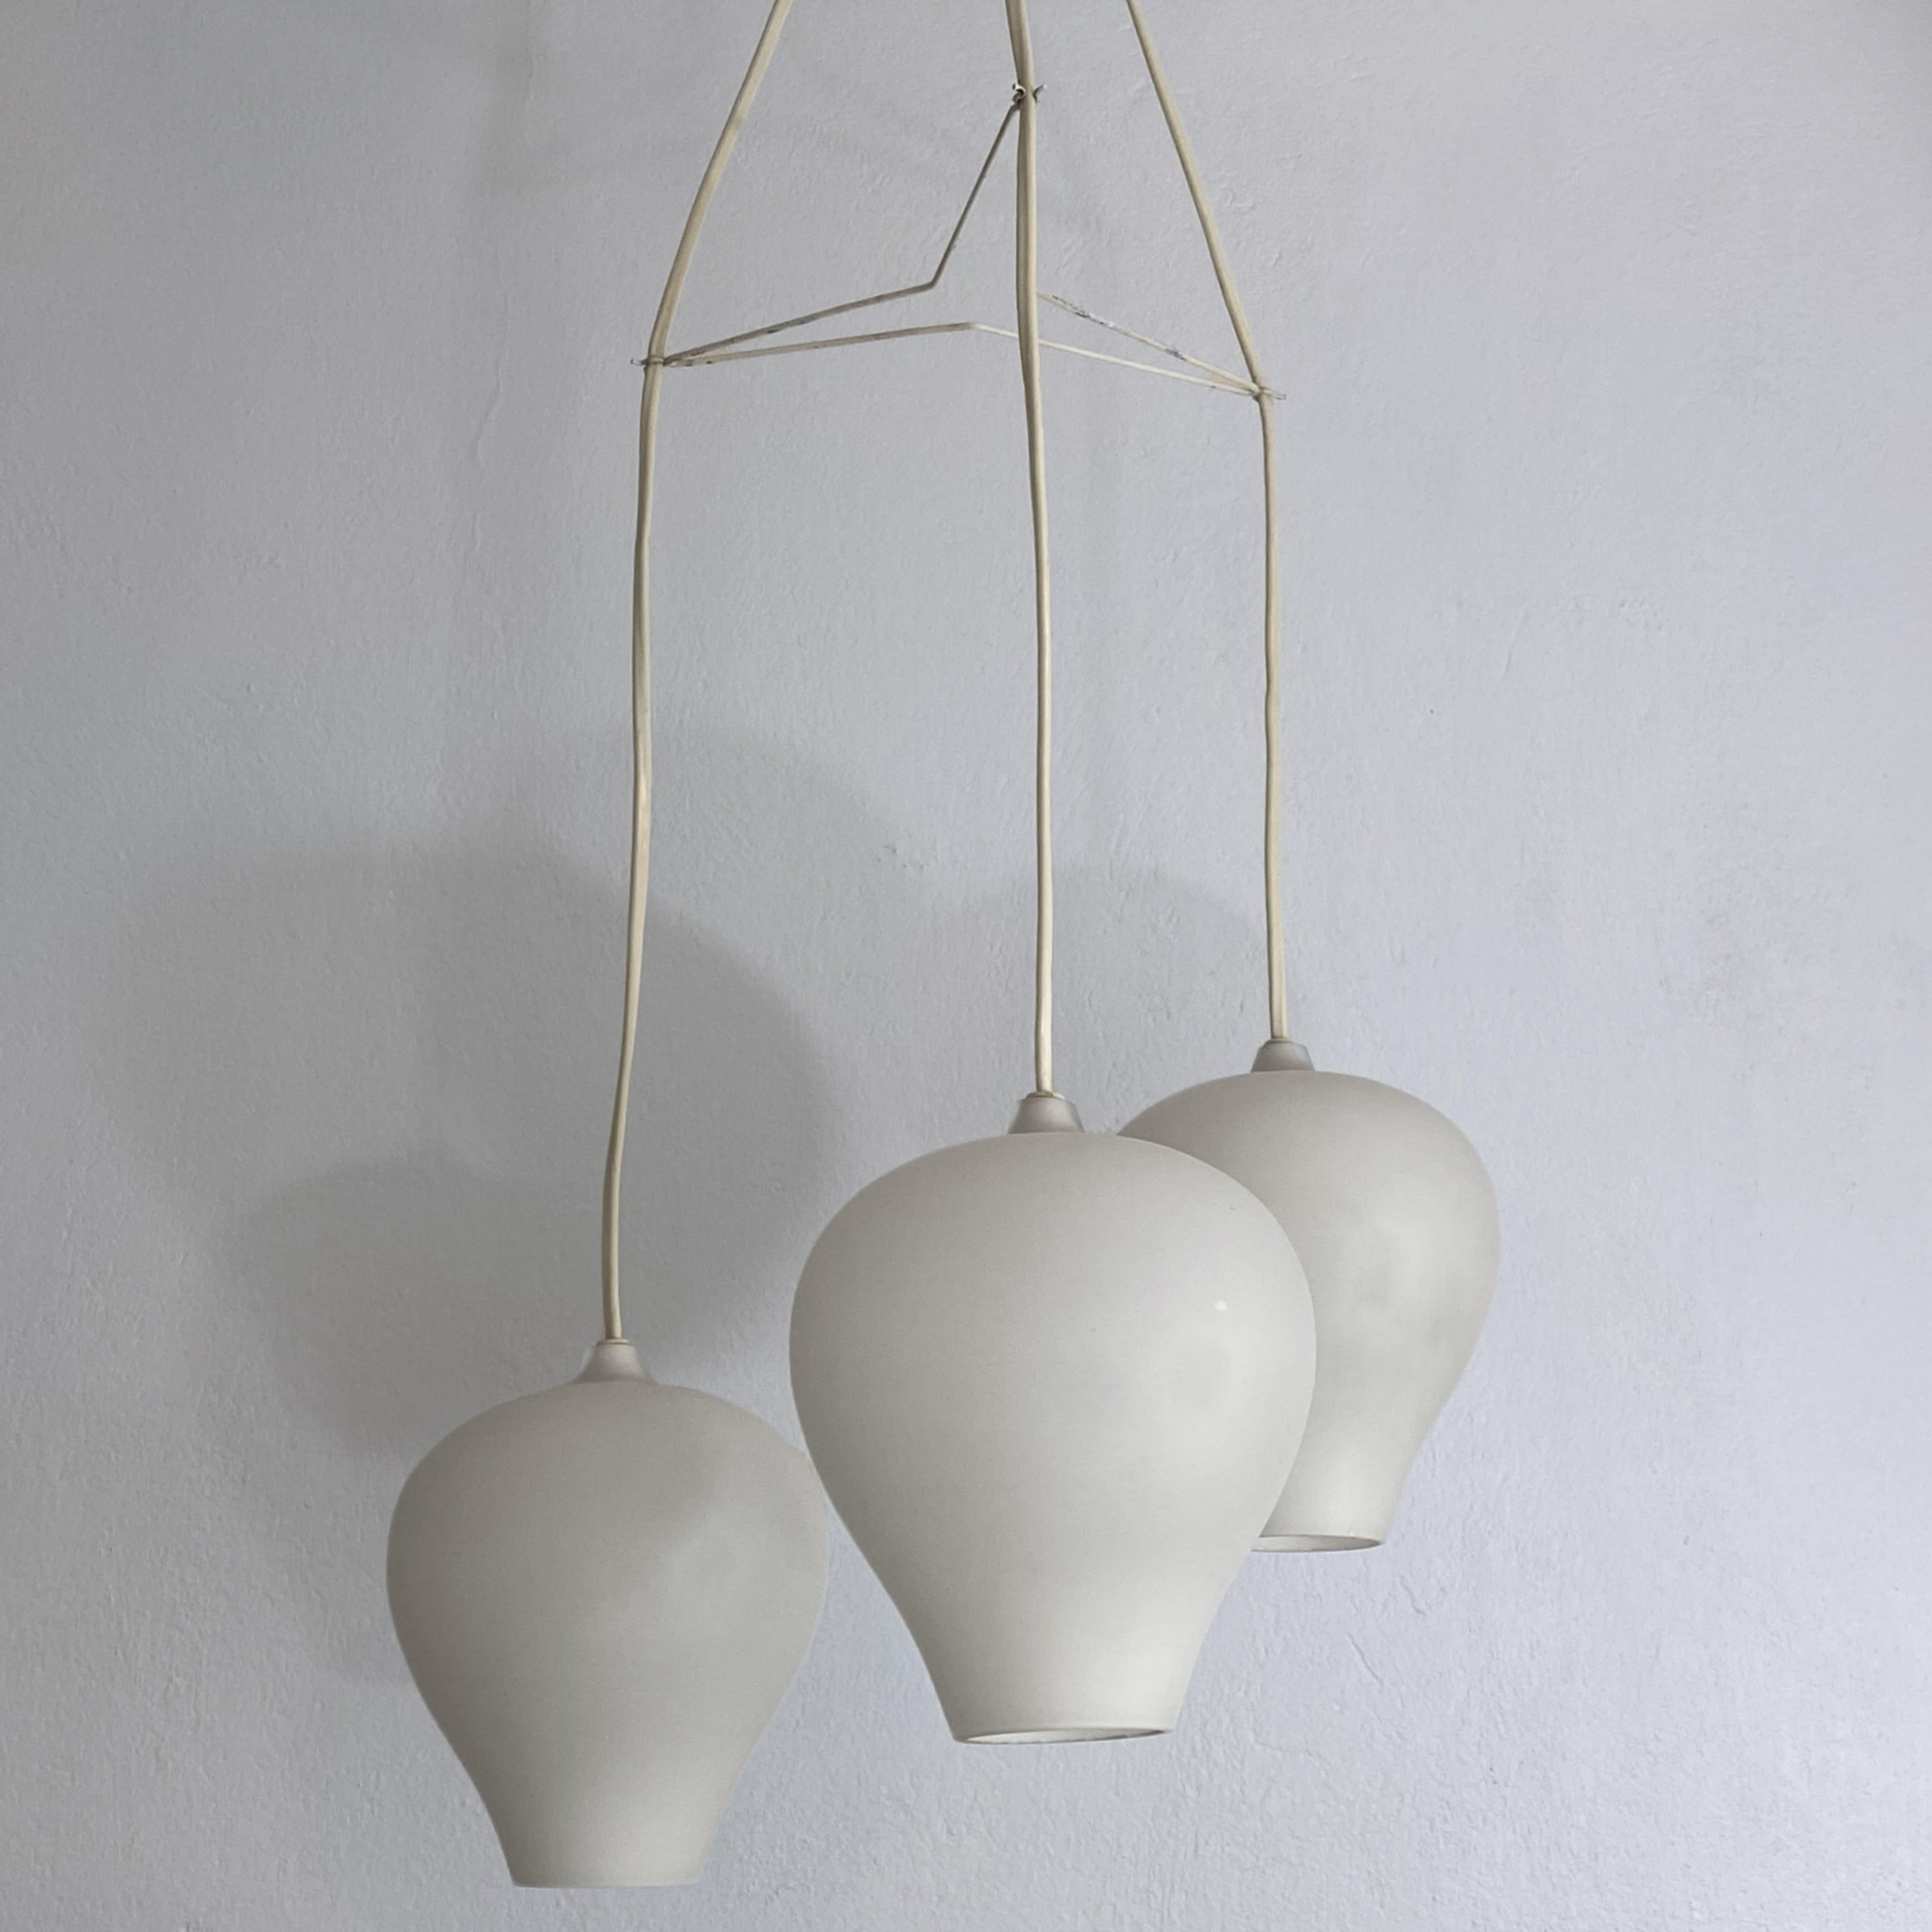 Pendant lamp designed by Alf Svensson for the renowned Swedish manufacturer Bergboms in 1953. This exquisite design features minimalist aesthetics with three clock-shaped opaline glass shades interconnected by a metal wire star. It is complemented